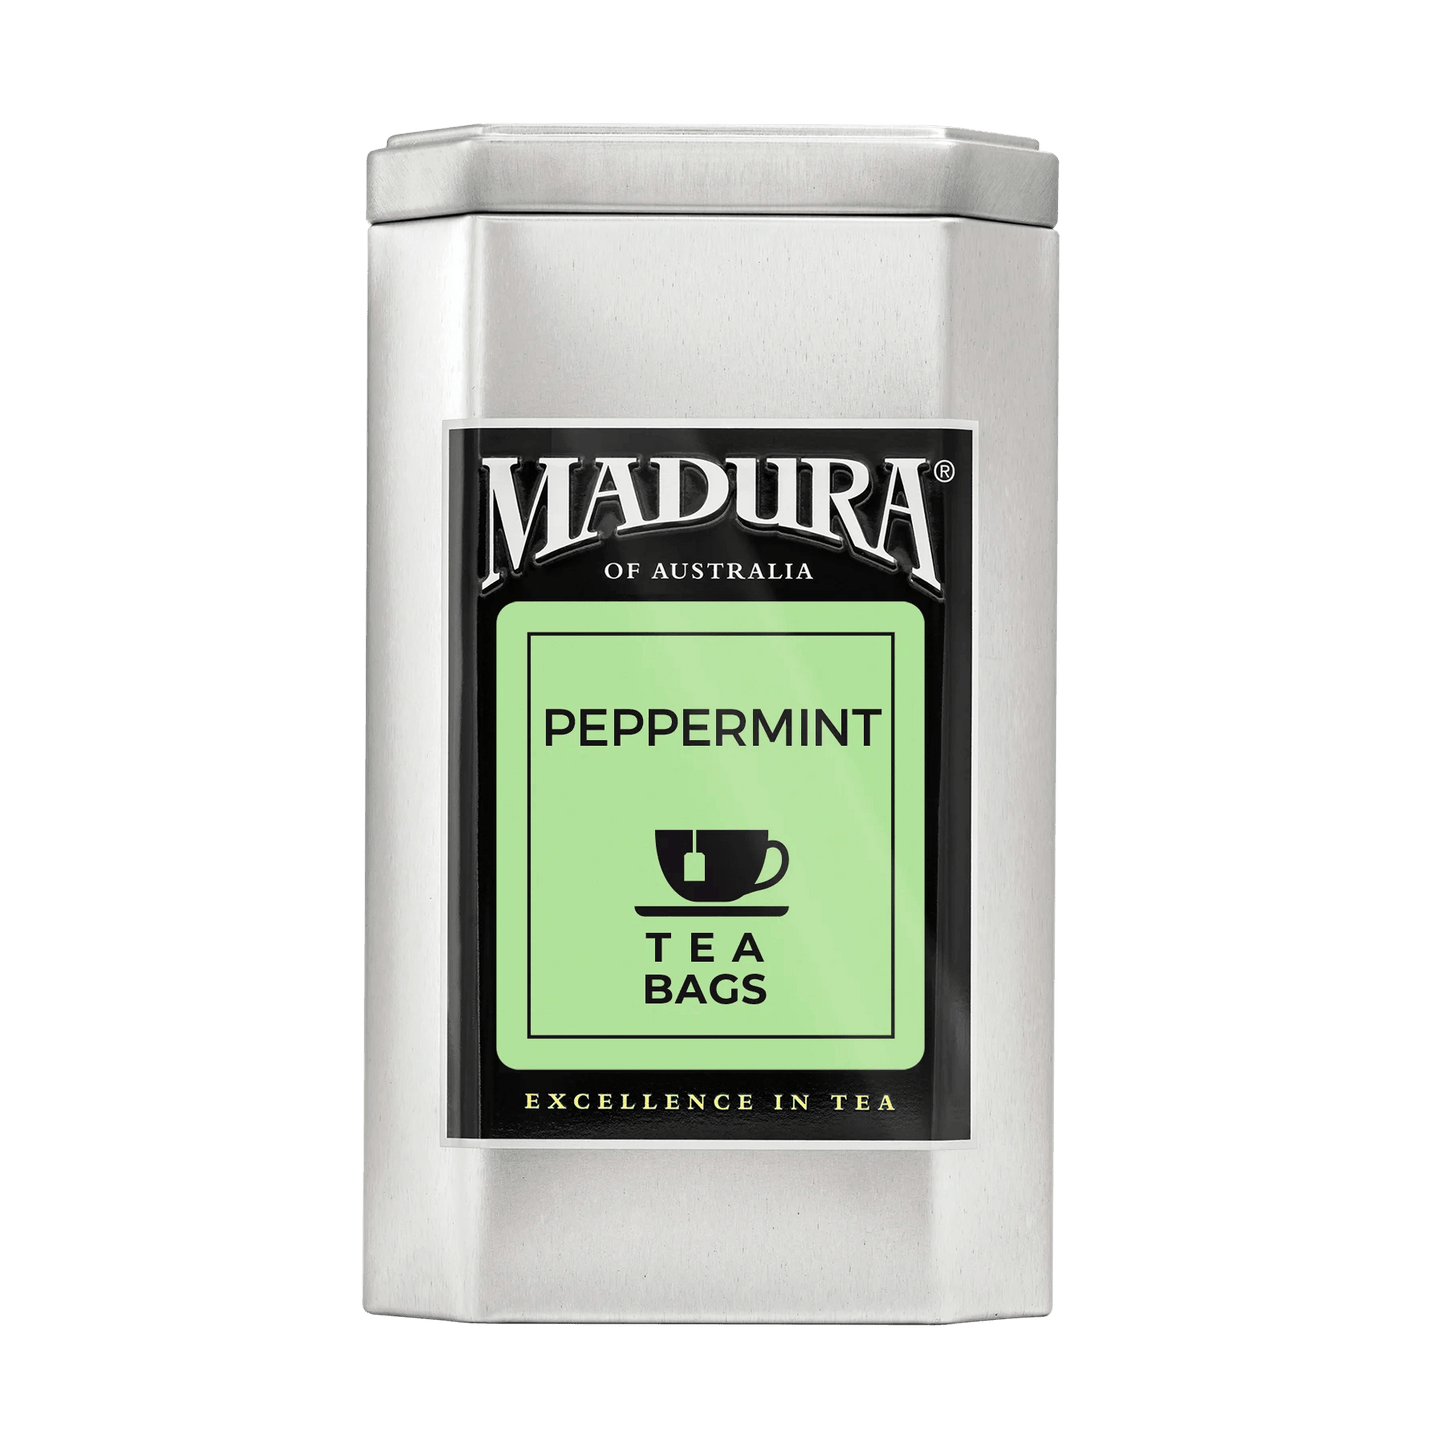 Empty Caddy with Peppermint Tea Bags Label - Madura Tea